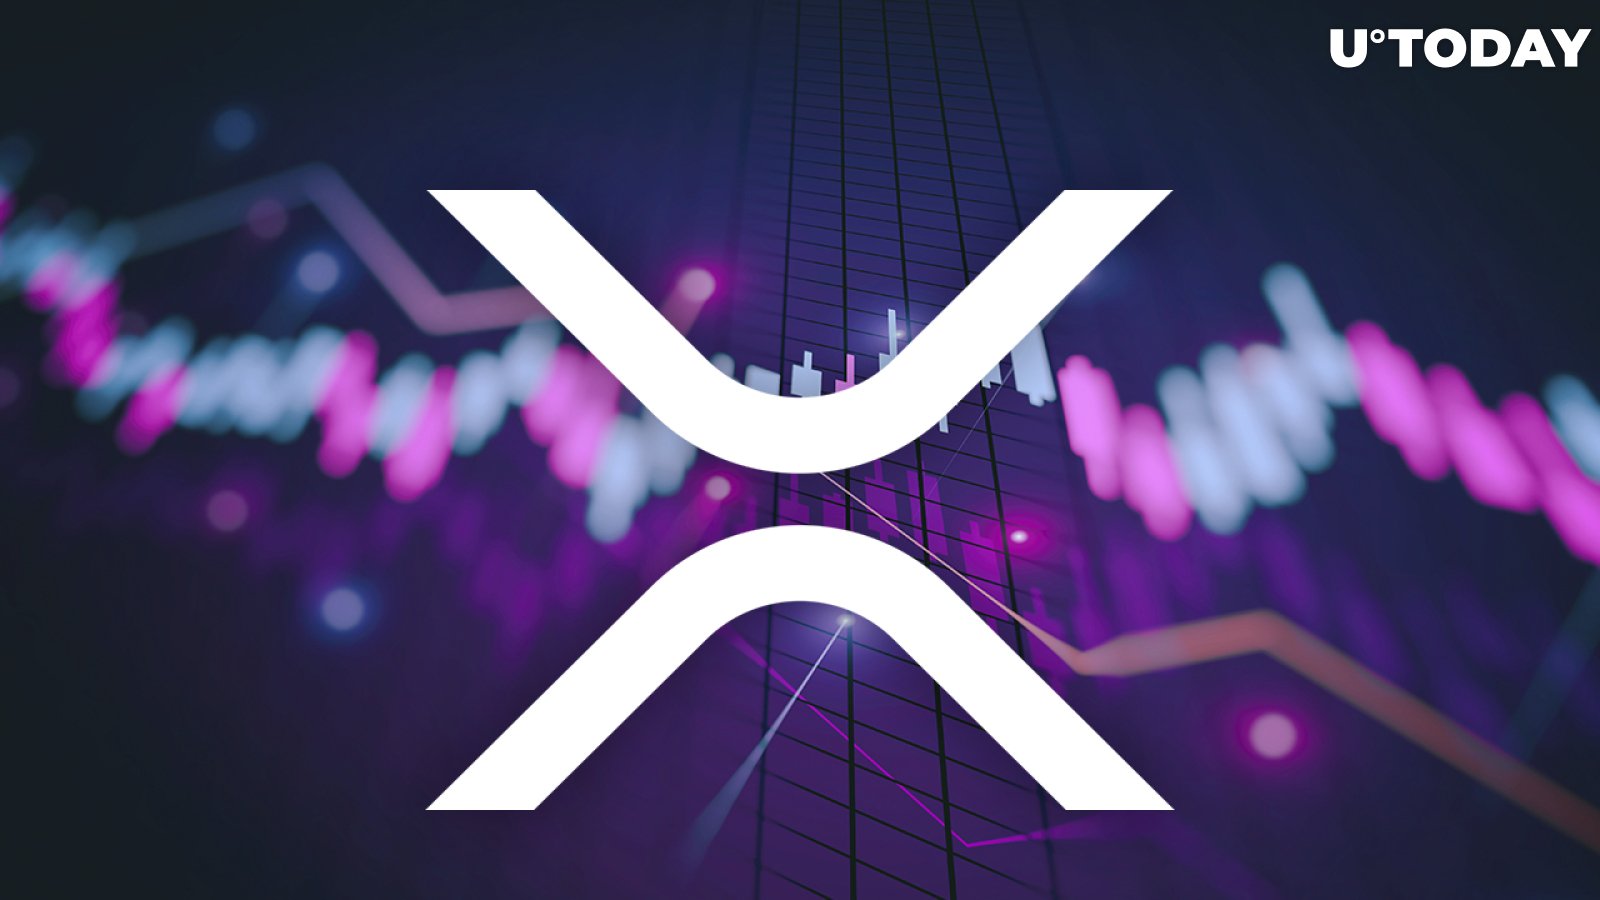 XRP Price Spikes 12%, Outperforming Top 10 as Crypto Market Rebounds